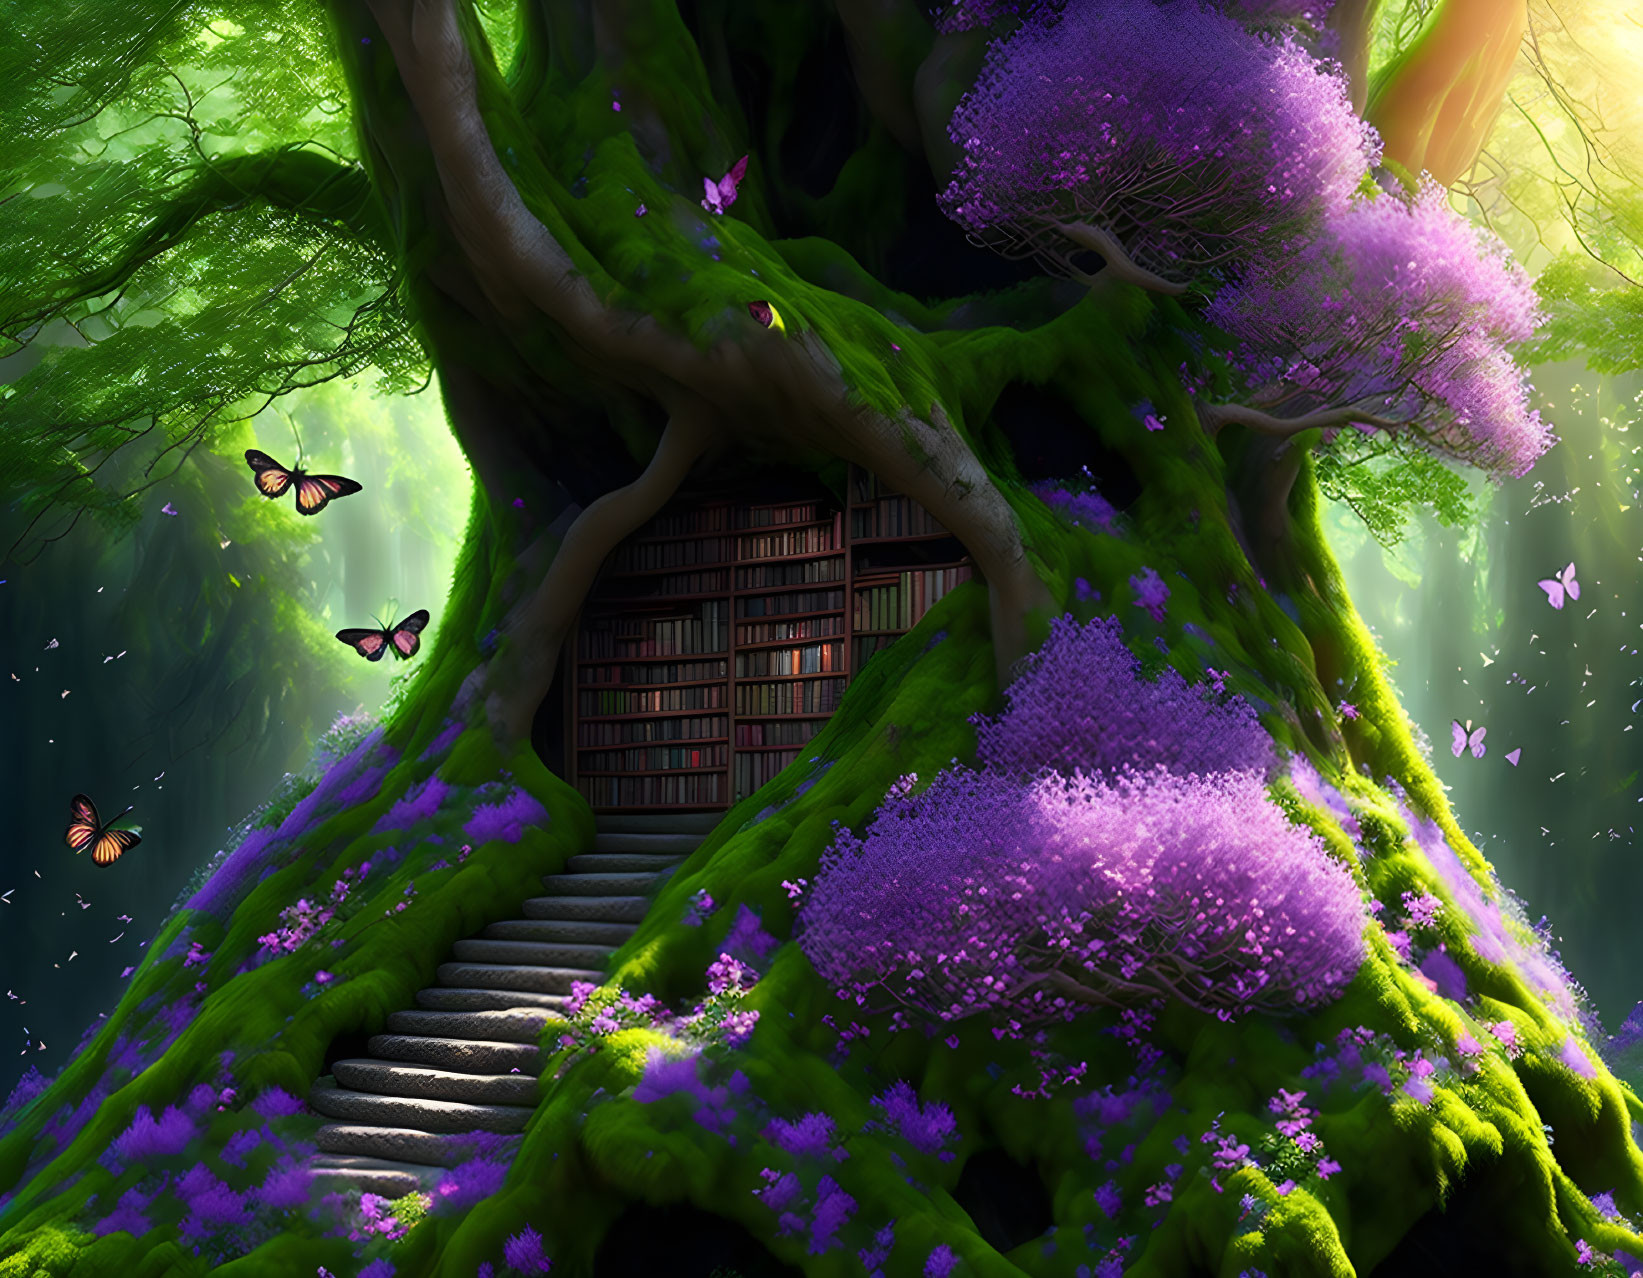 Mystical tree with purple foliage and bookshelf, butterflies under radiant light